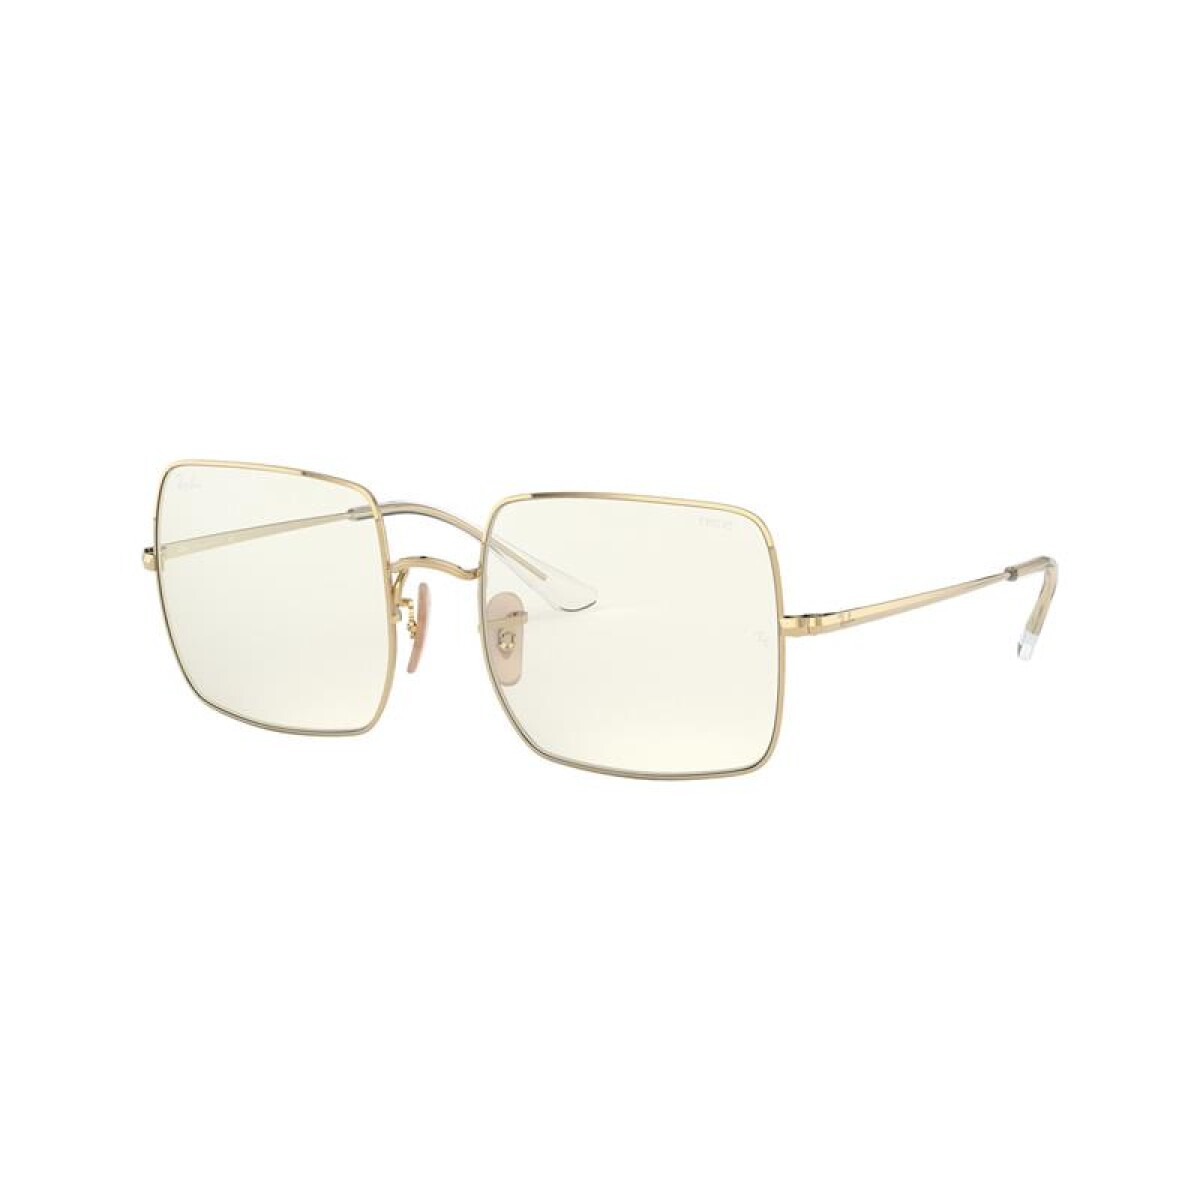 Ray Ban Rb1971 Square - 001/5f 